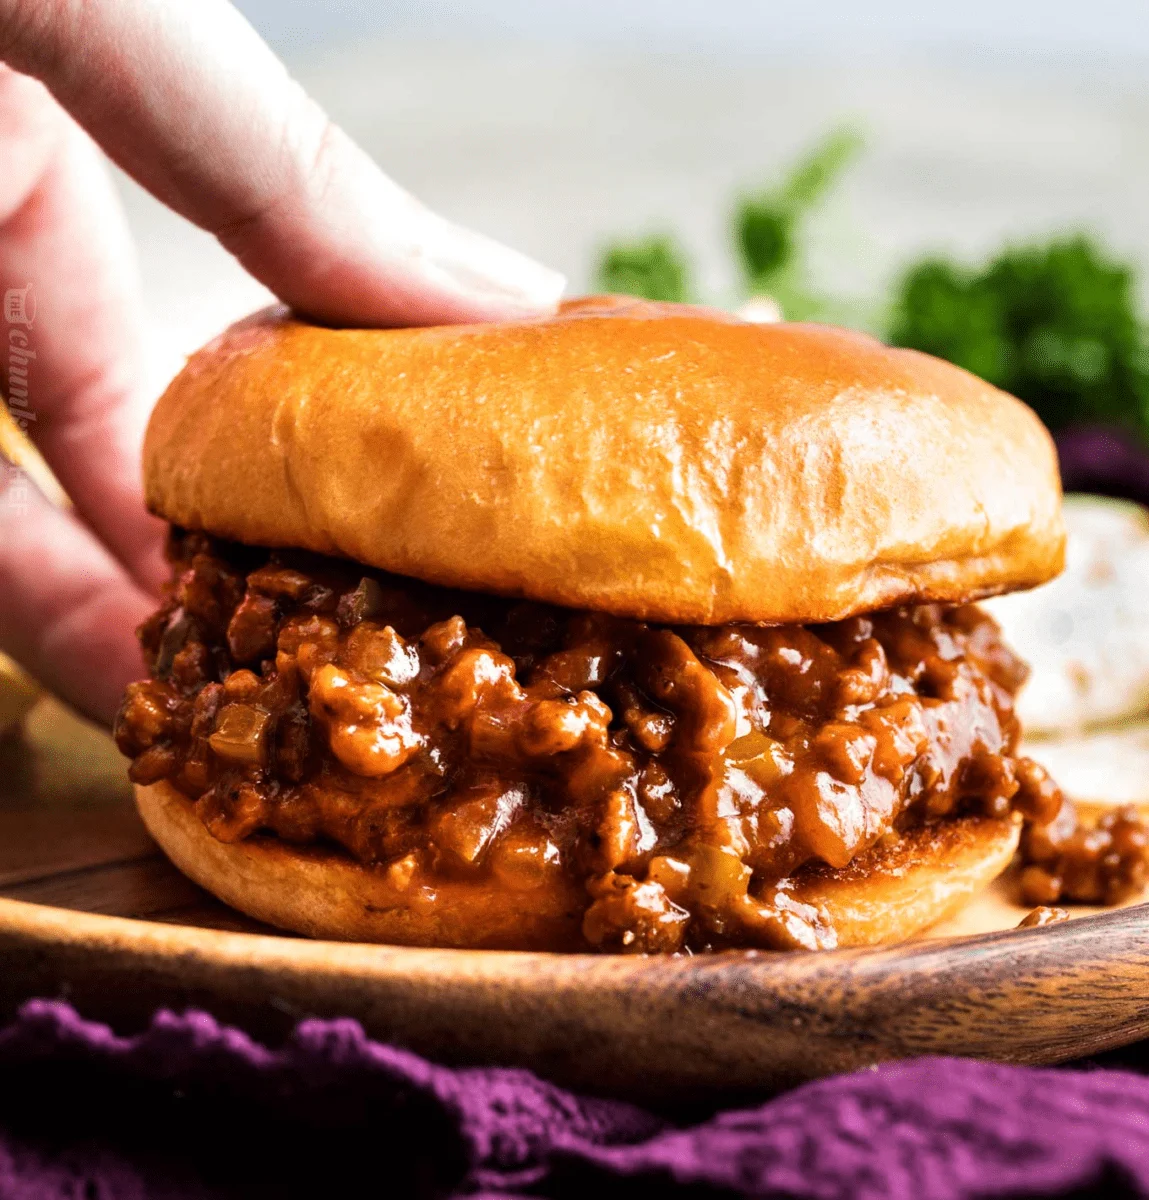 A hand reaches down to grab a bread bun filled with sloppy joe mince mix that is on a wooden plate. 